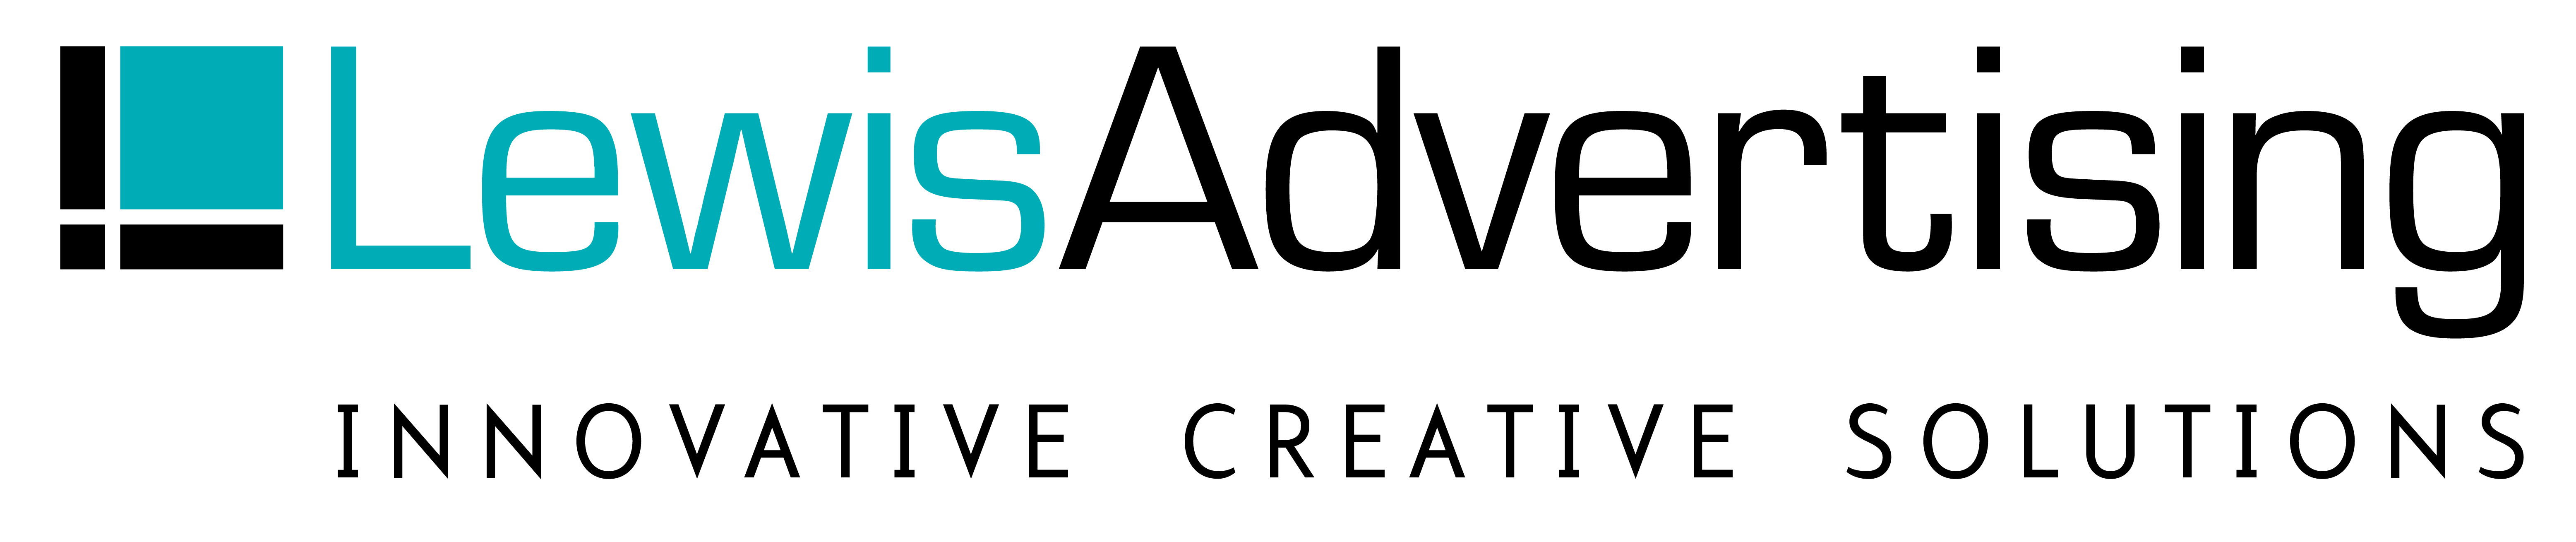 lewis advertising logo black and teal colors